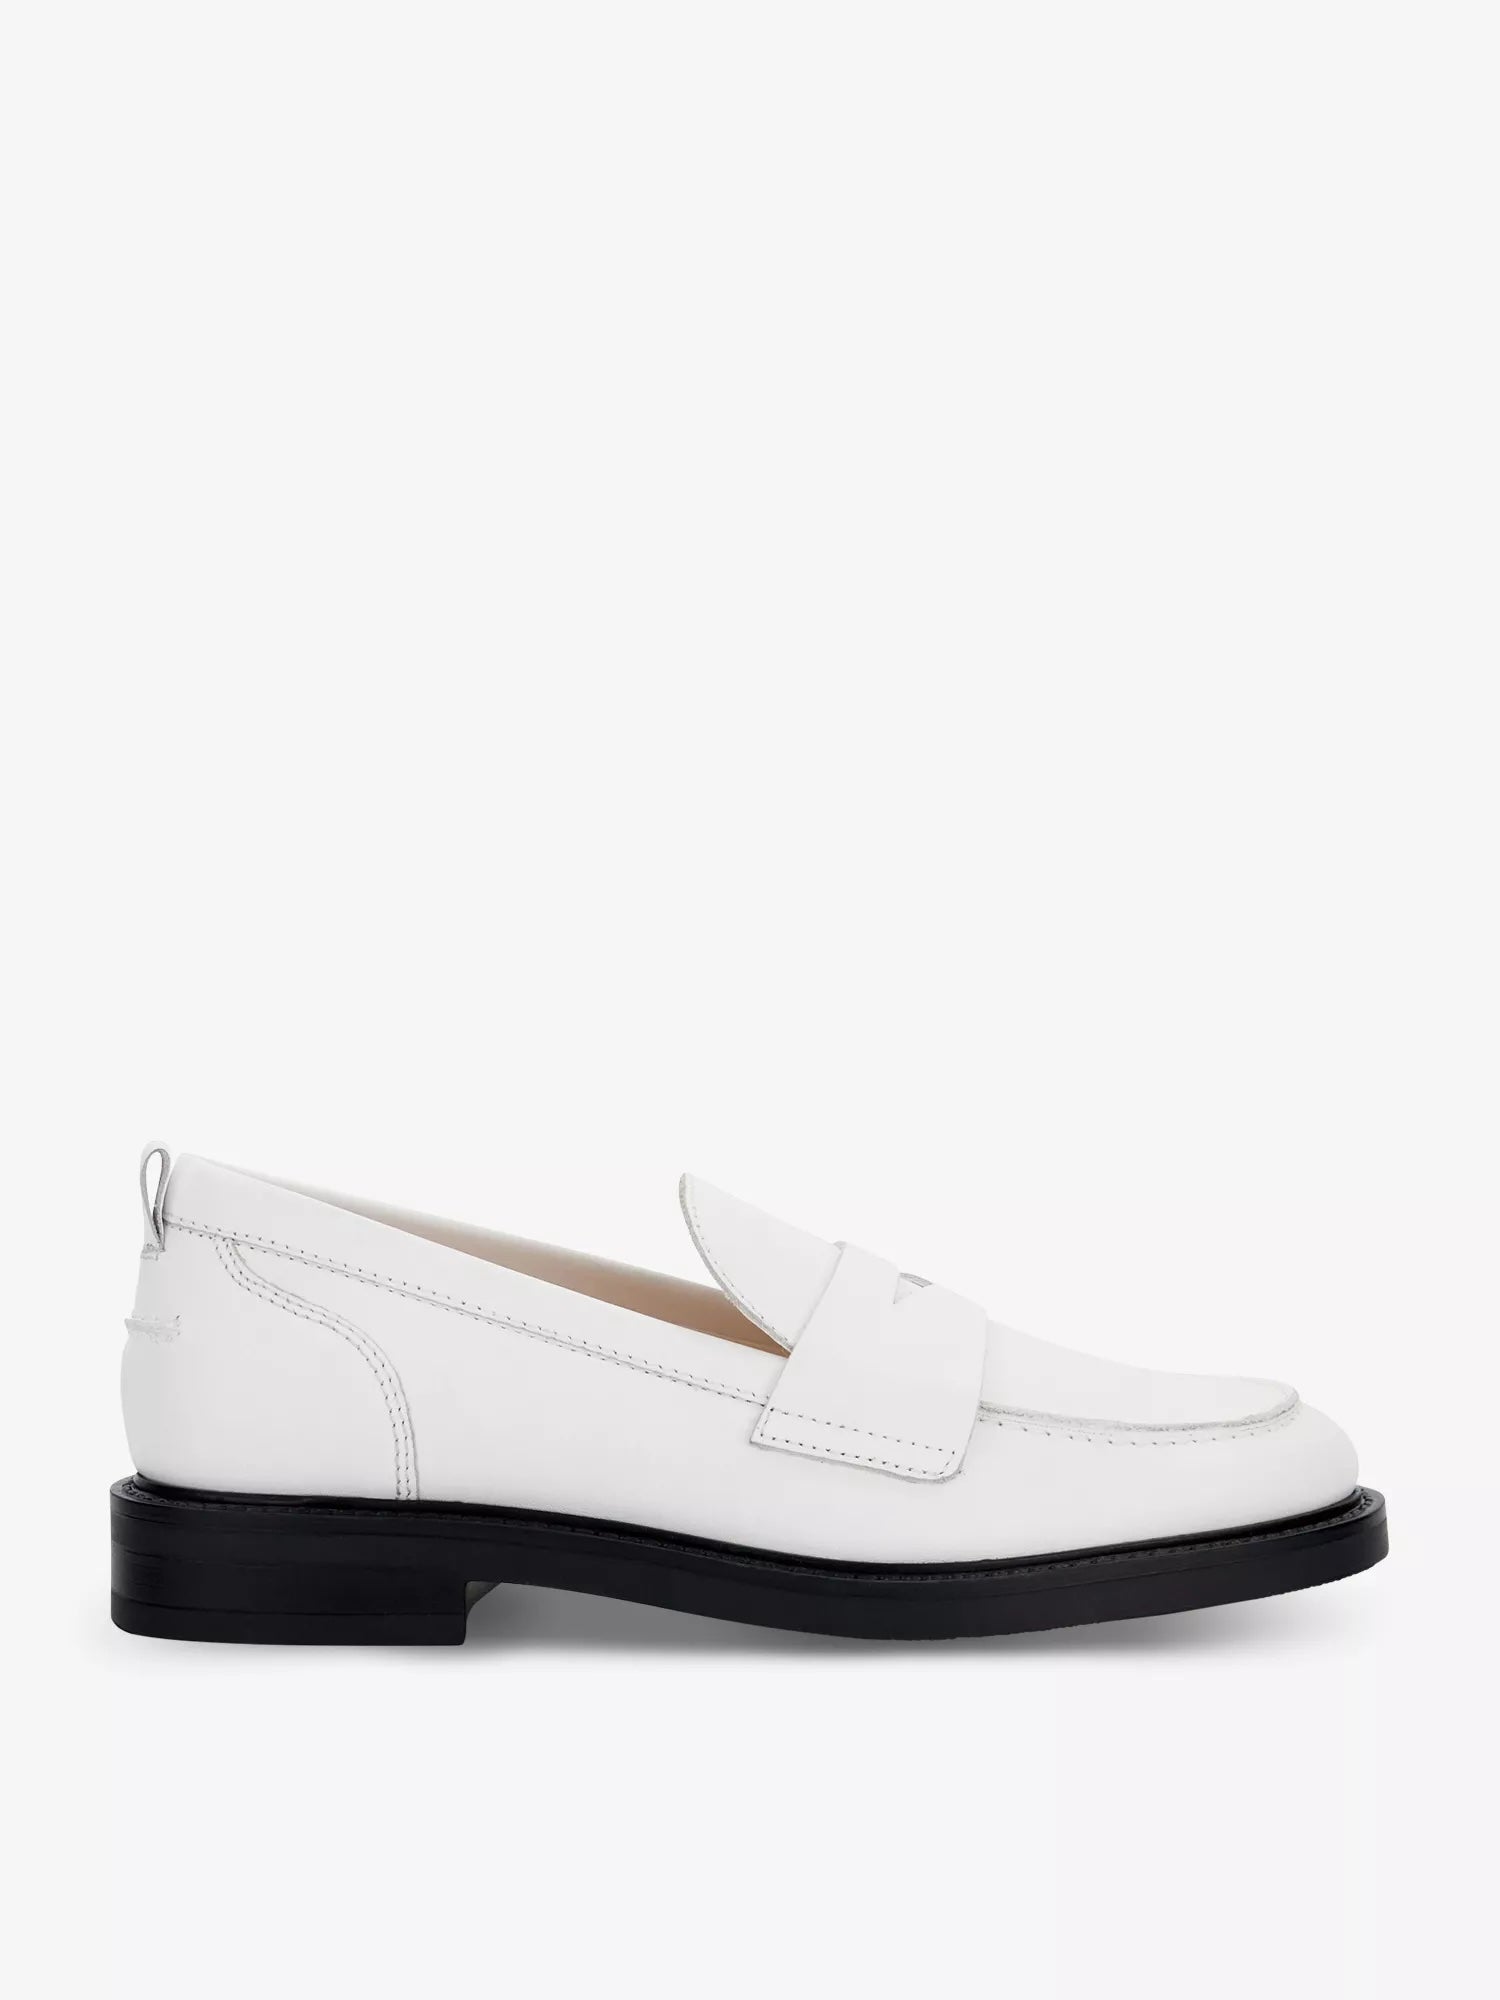 Dune + Geeno Tonal-Stitch Leather Loafers